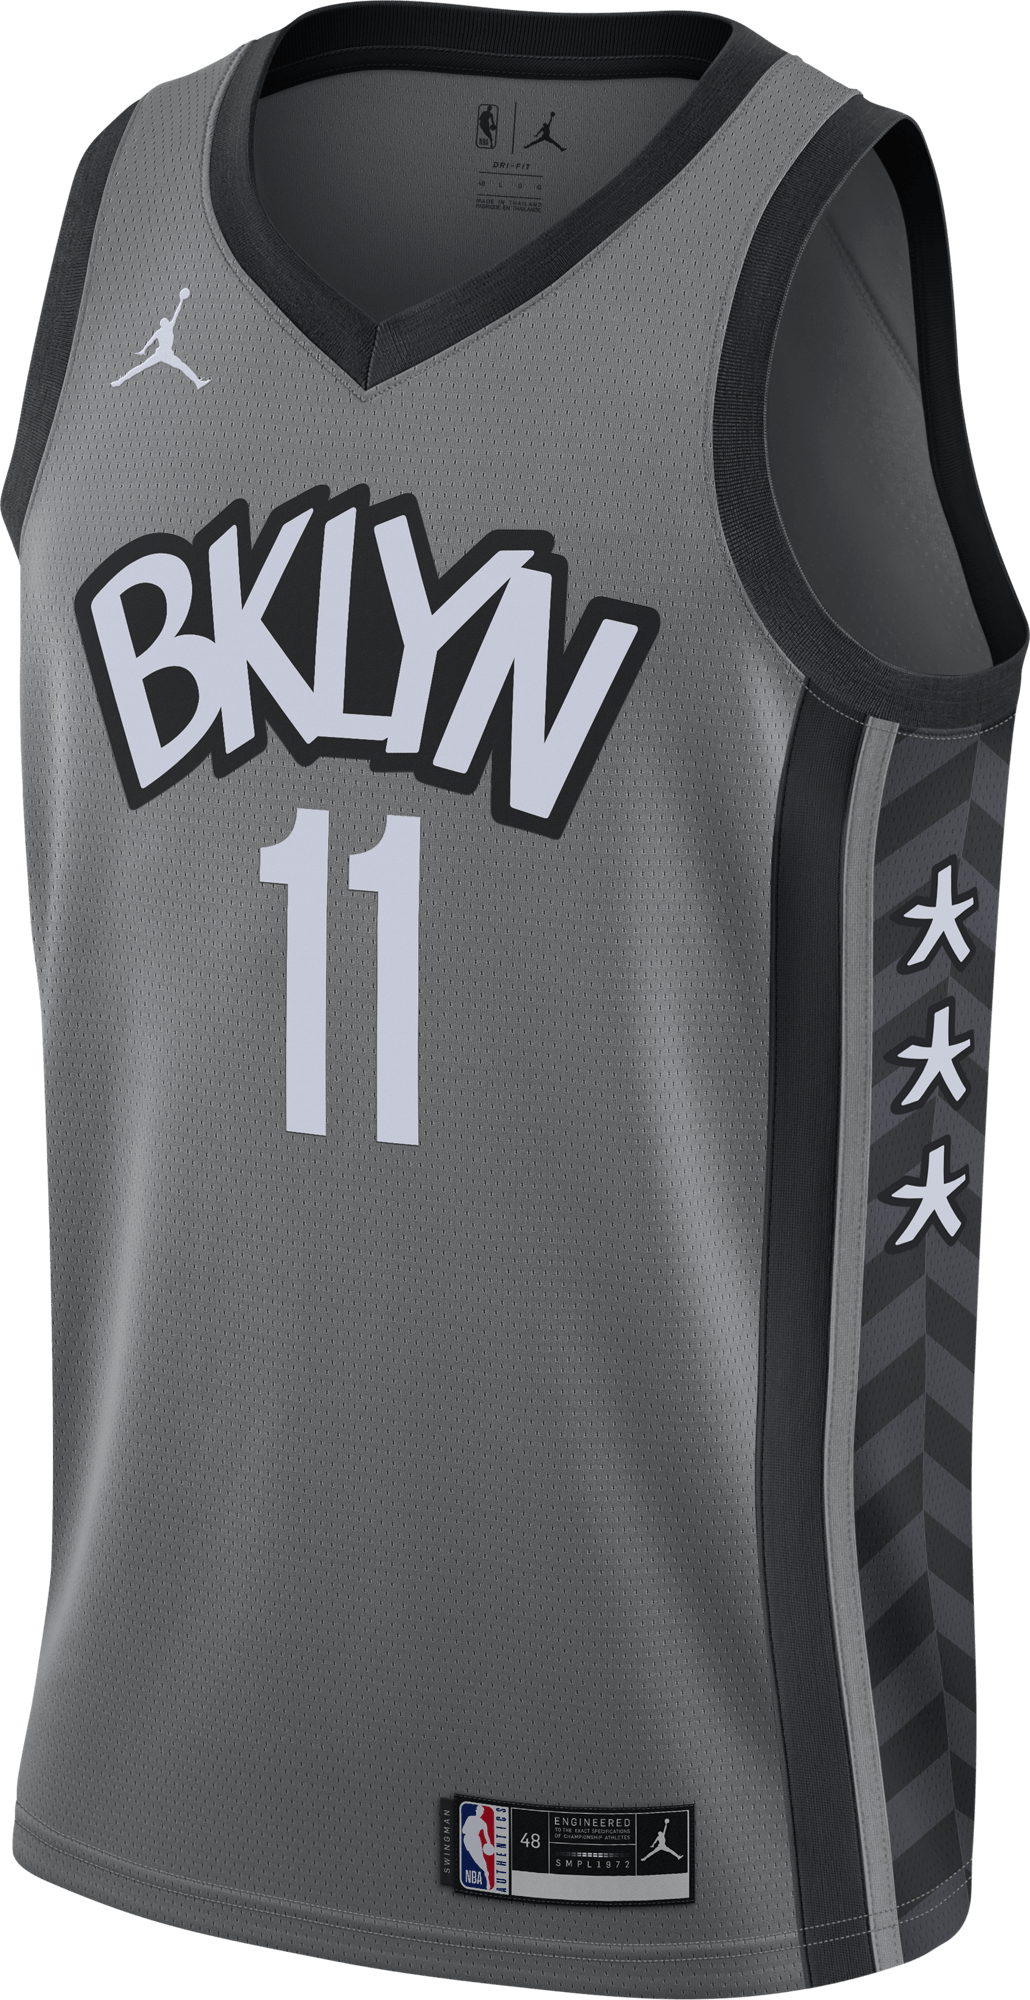 Nets Statement Edition 2020 Kyrie Irving